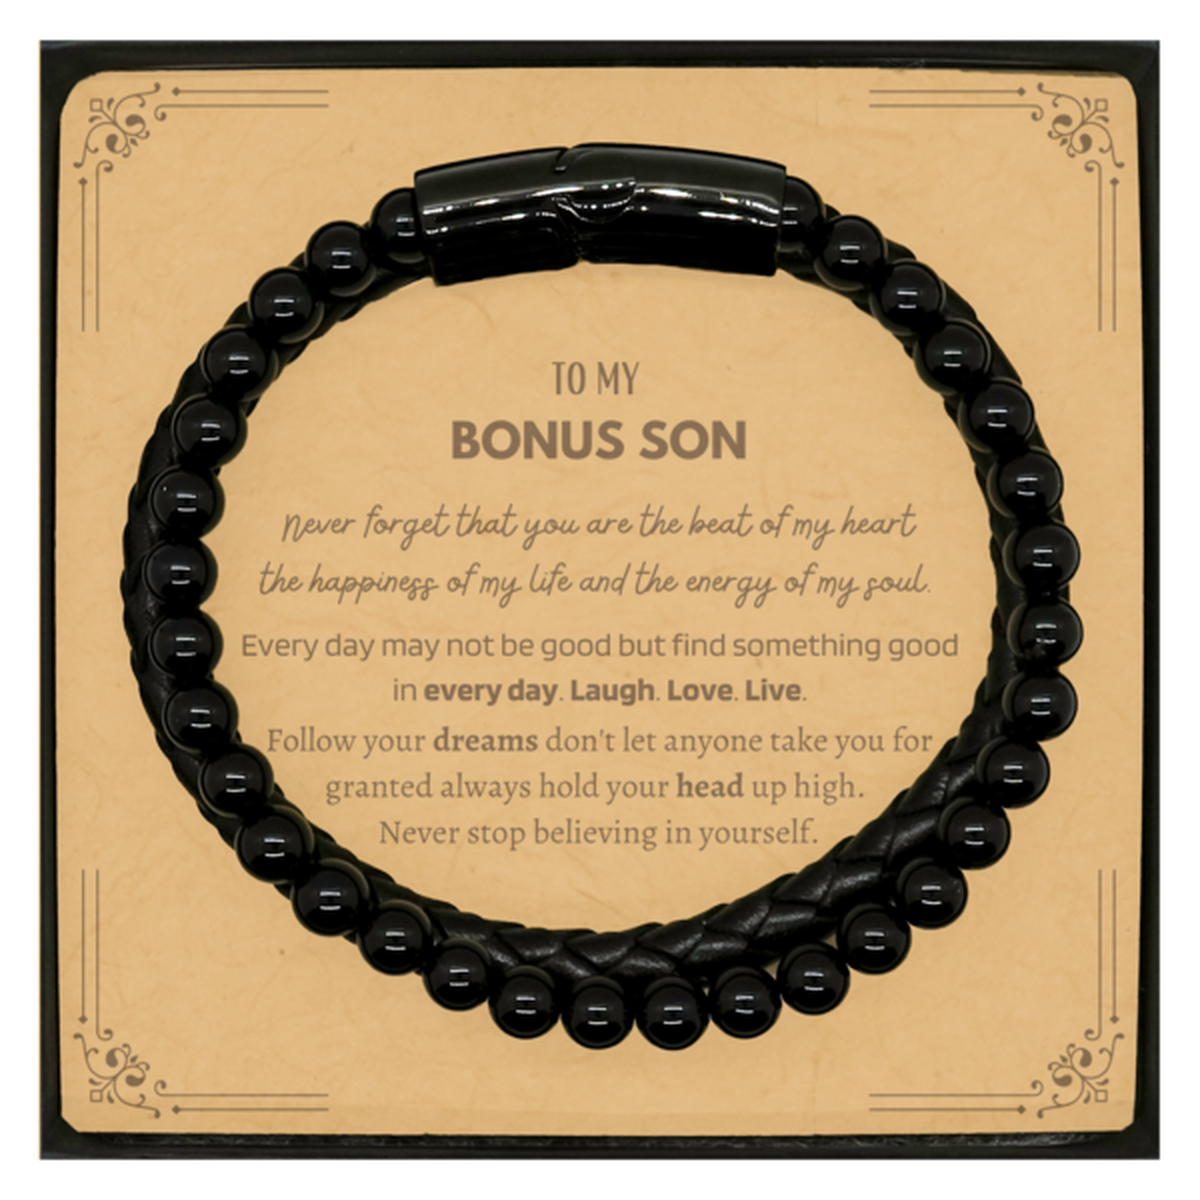 To My Bonus Son Message Card Gifts, Christmas Bonus Son Stone Leather Bracelets Present, Birthday Unique Motivational For Bonus Son, To My Bonus Son Never forget that you are the beat of my heart the happiness of my life and the energy of my soul